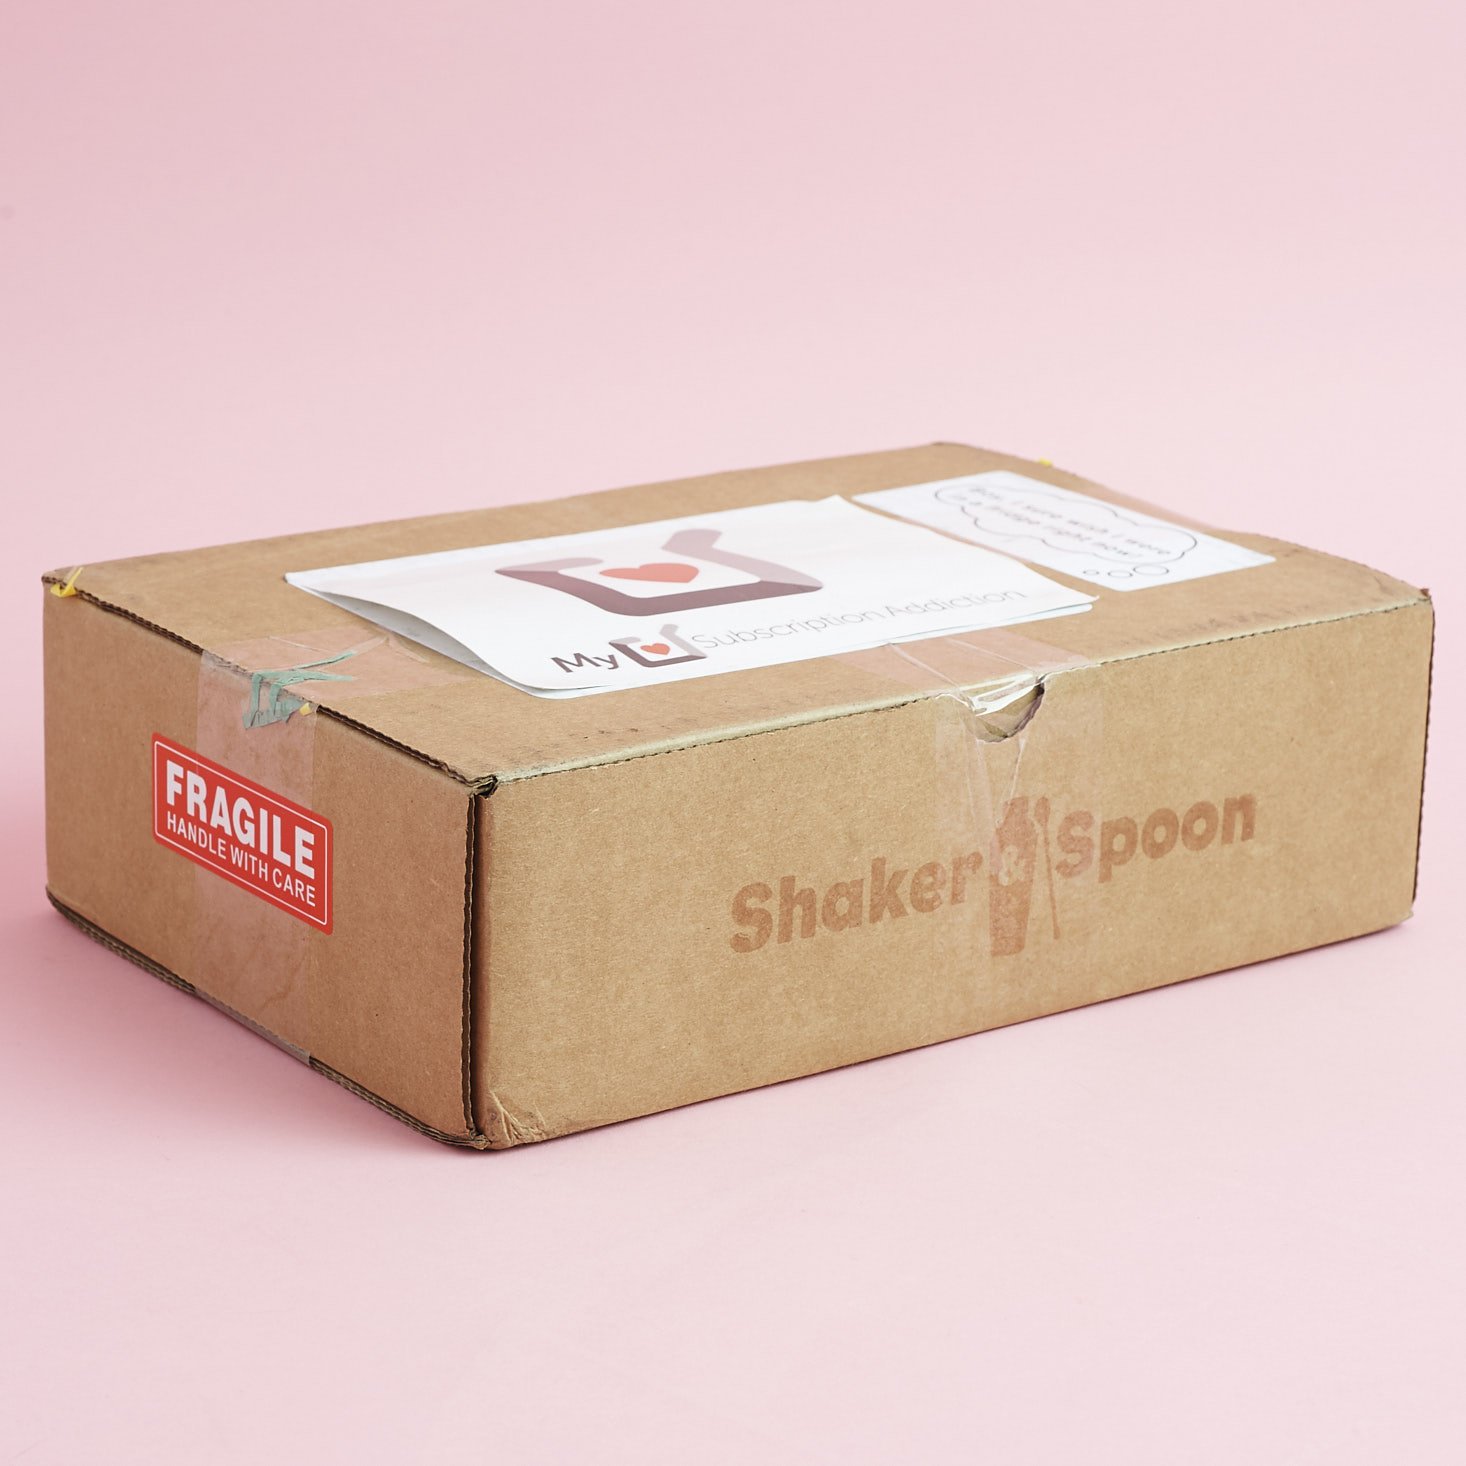 Shaker & Spoon Subscription Box Review + Coupon – October 2017